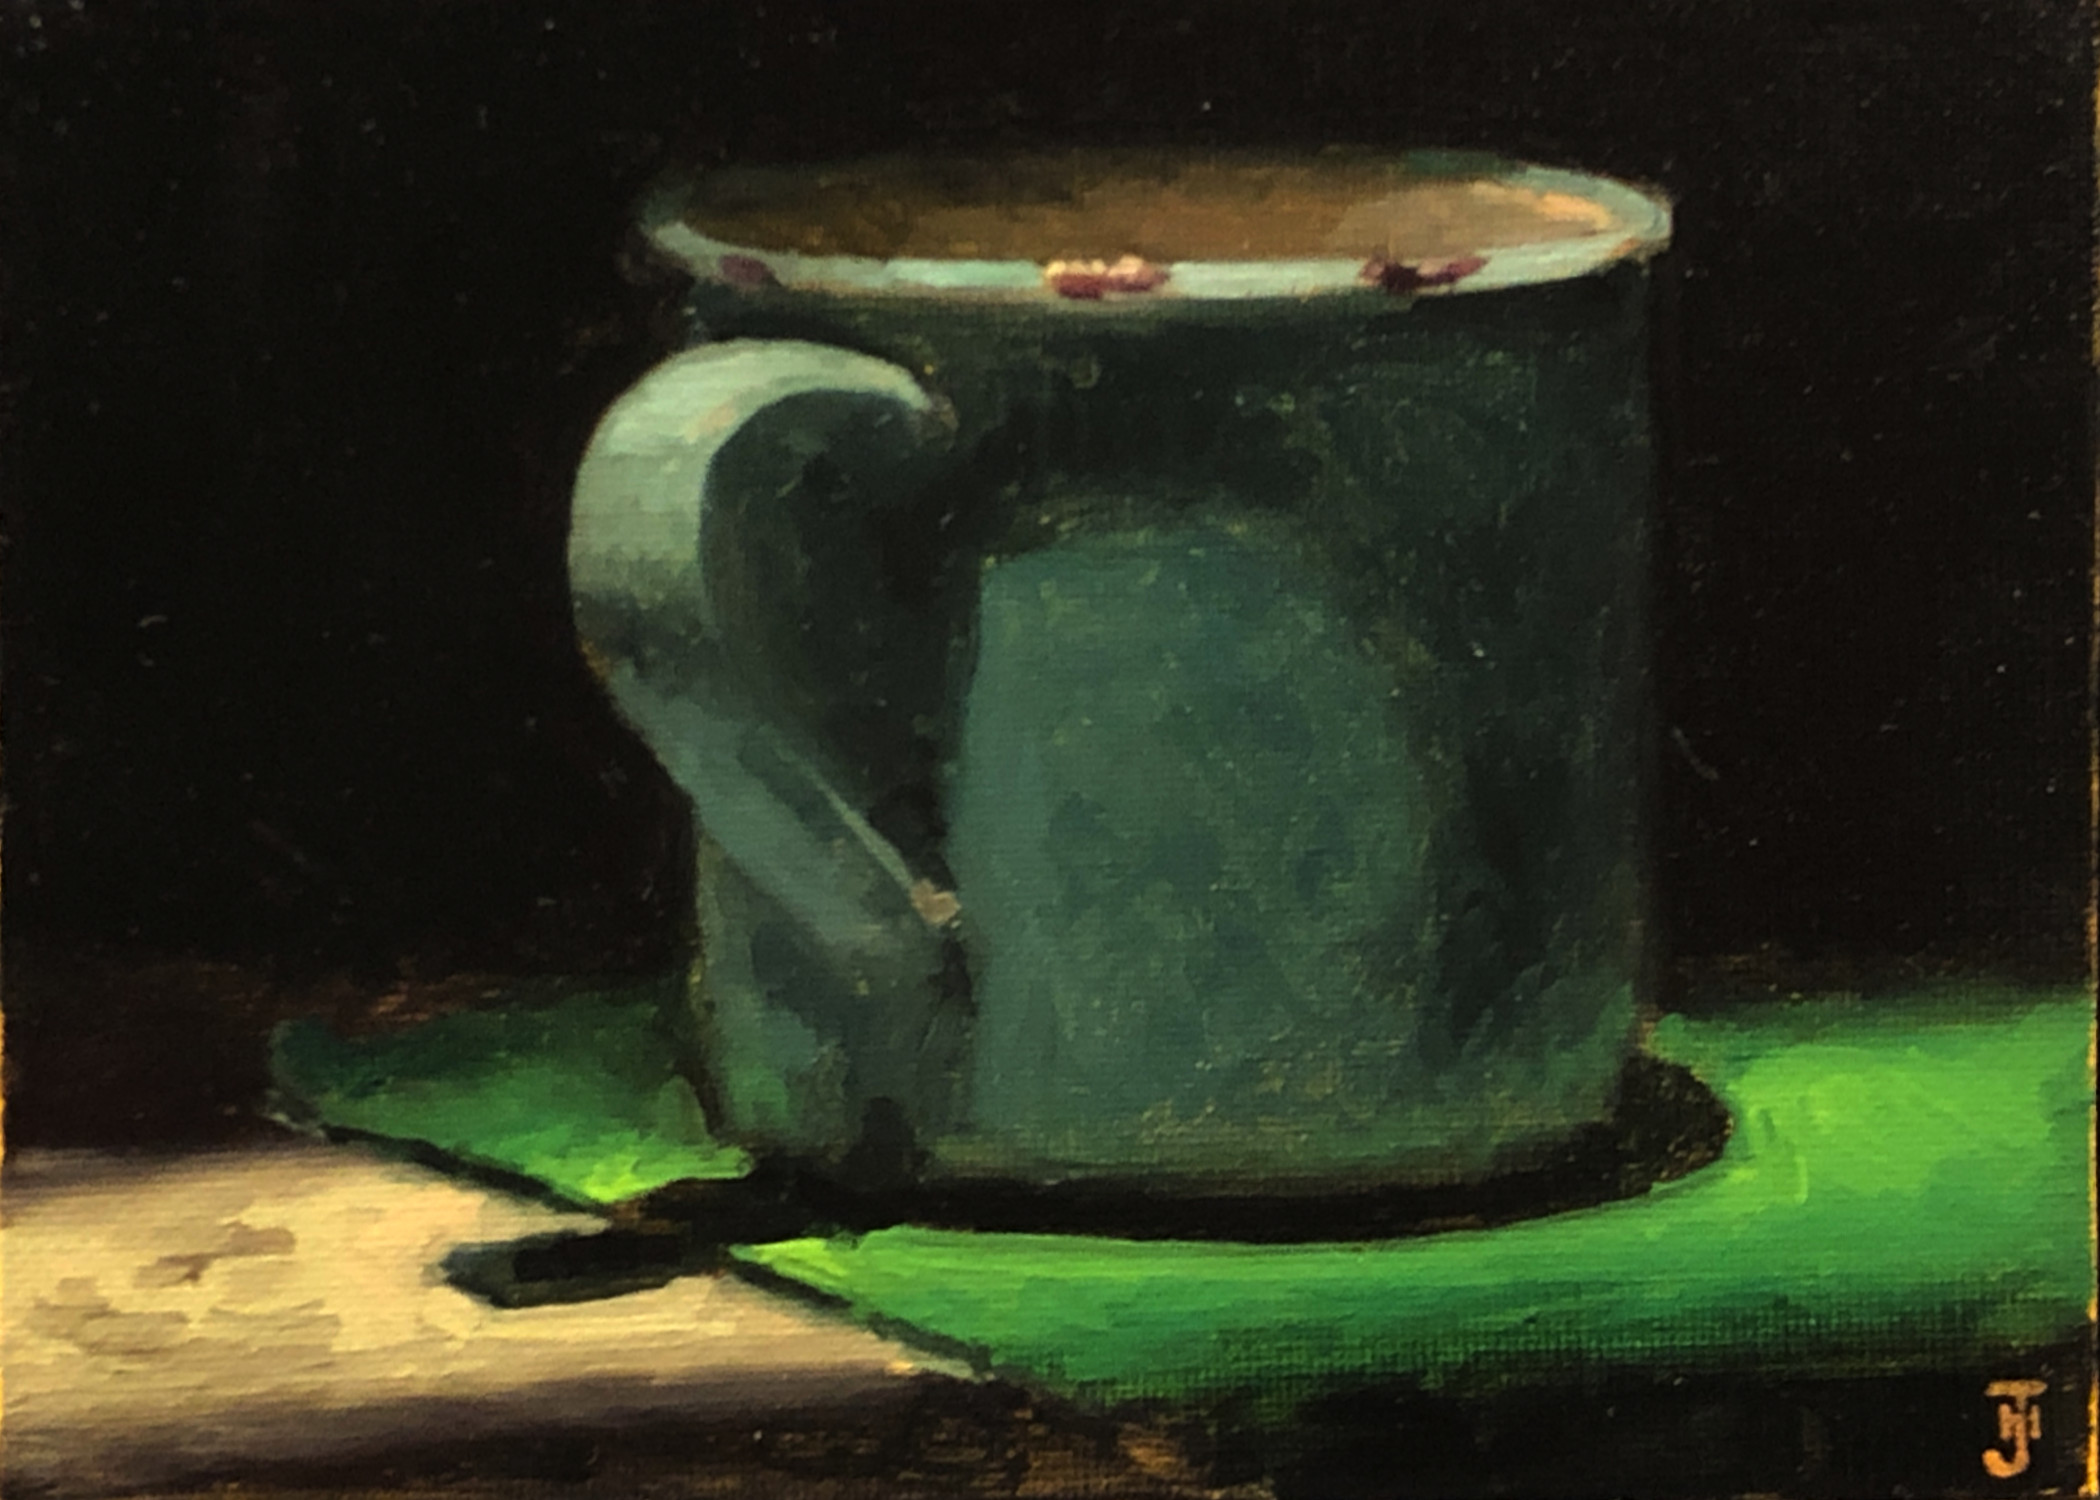 "Green Enamel Cup"
View this painting